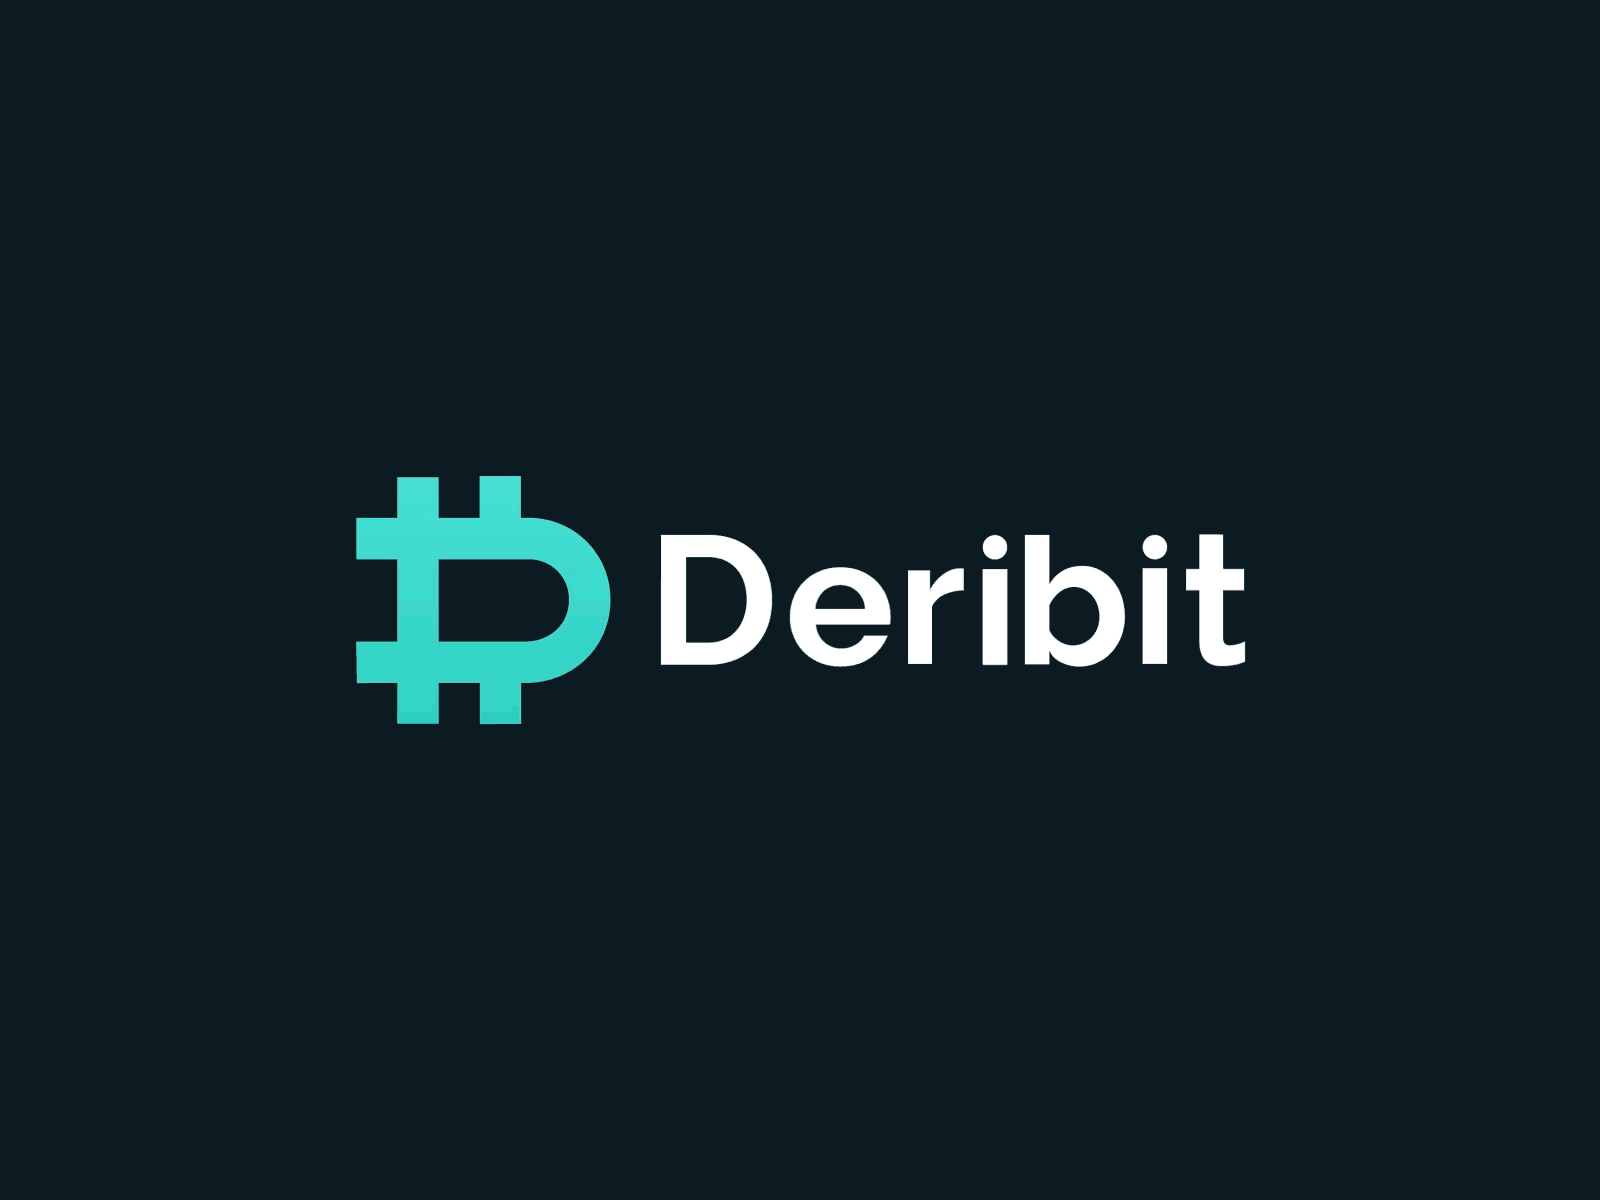 The animated logo made for Deribit 🔥💰